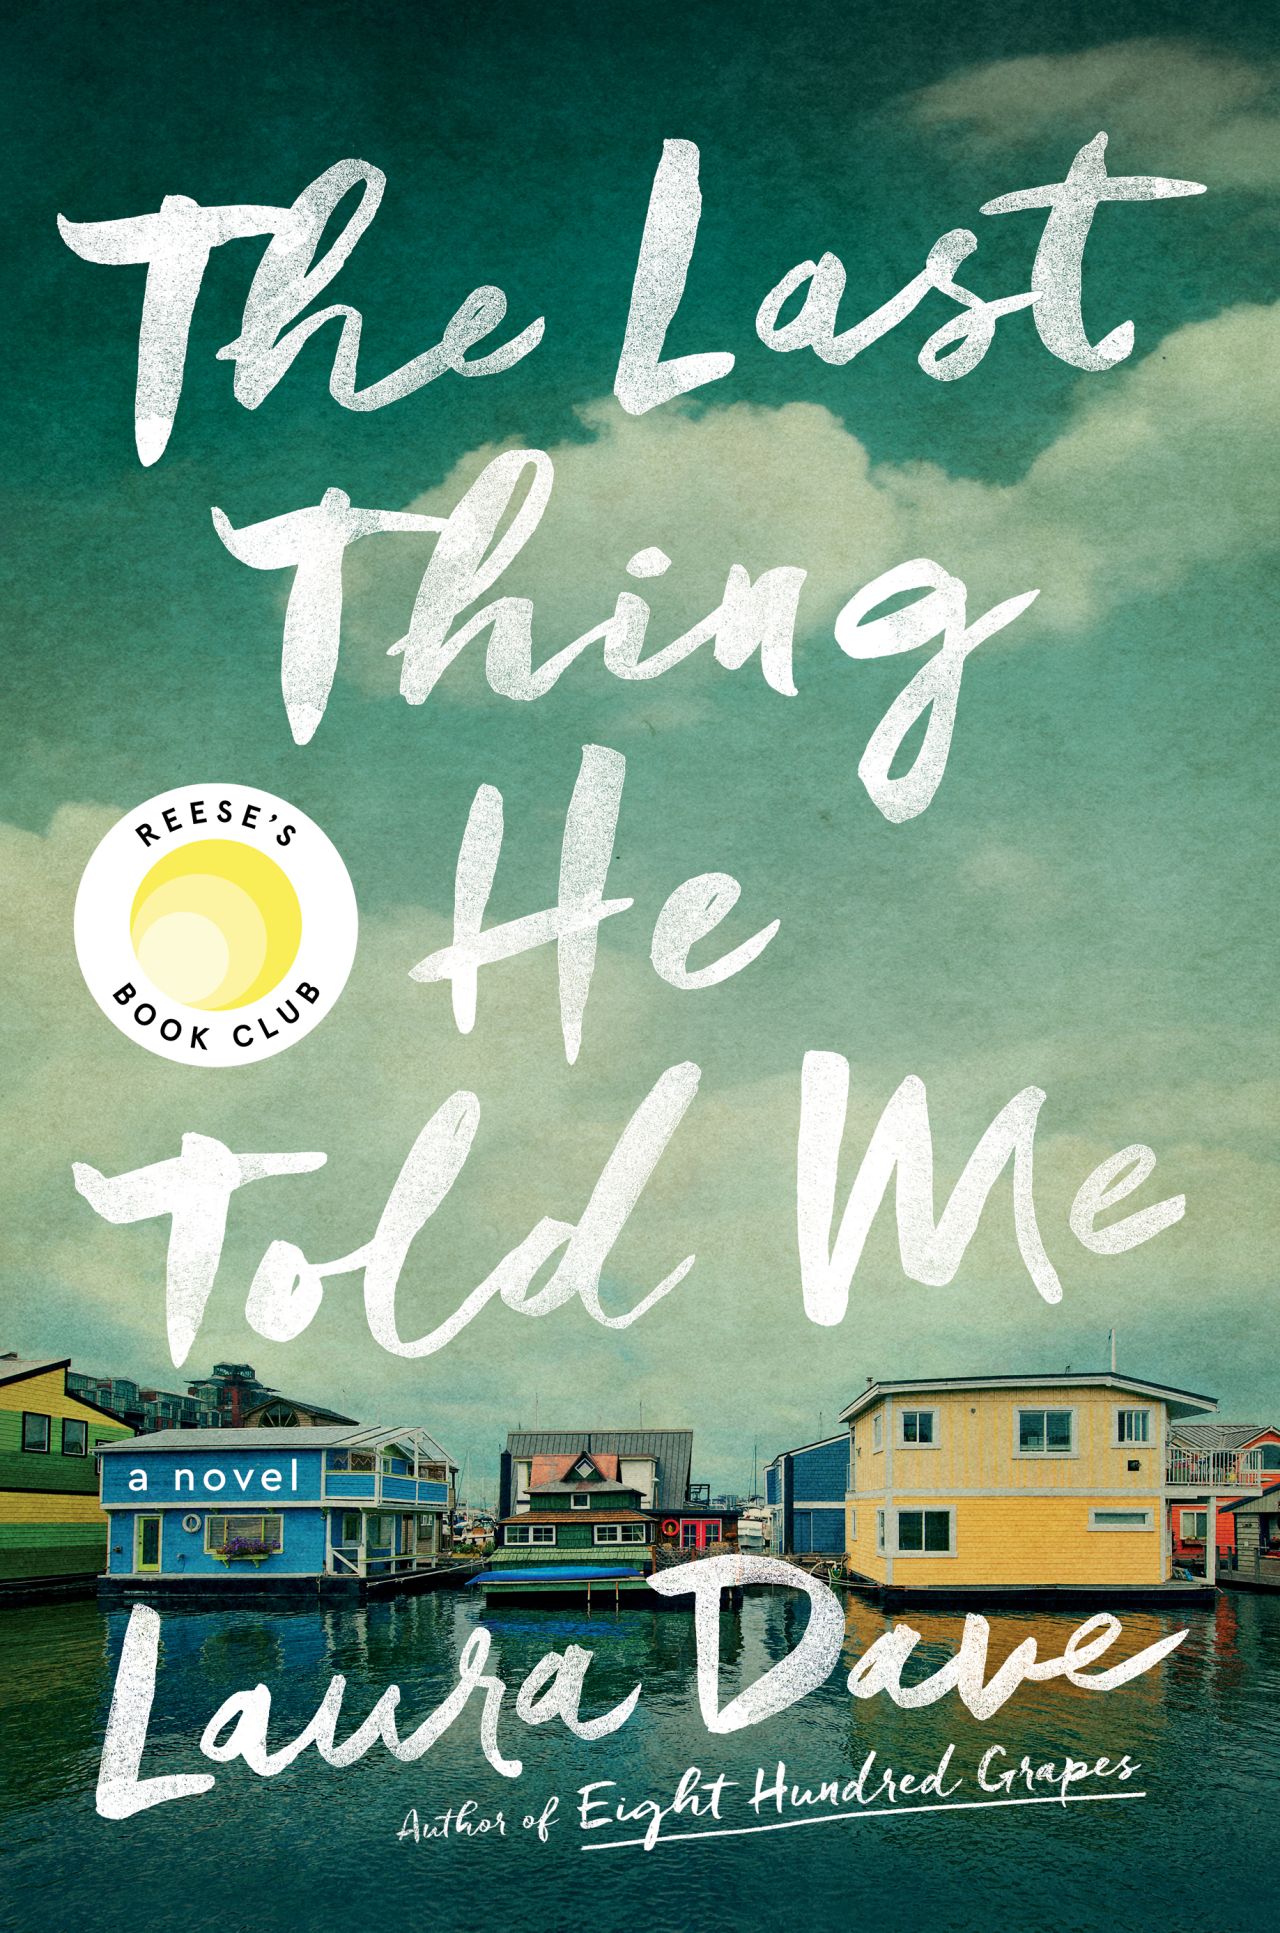 reese witherspoon book club The Last Thing He Told Me